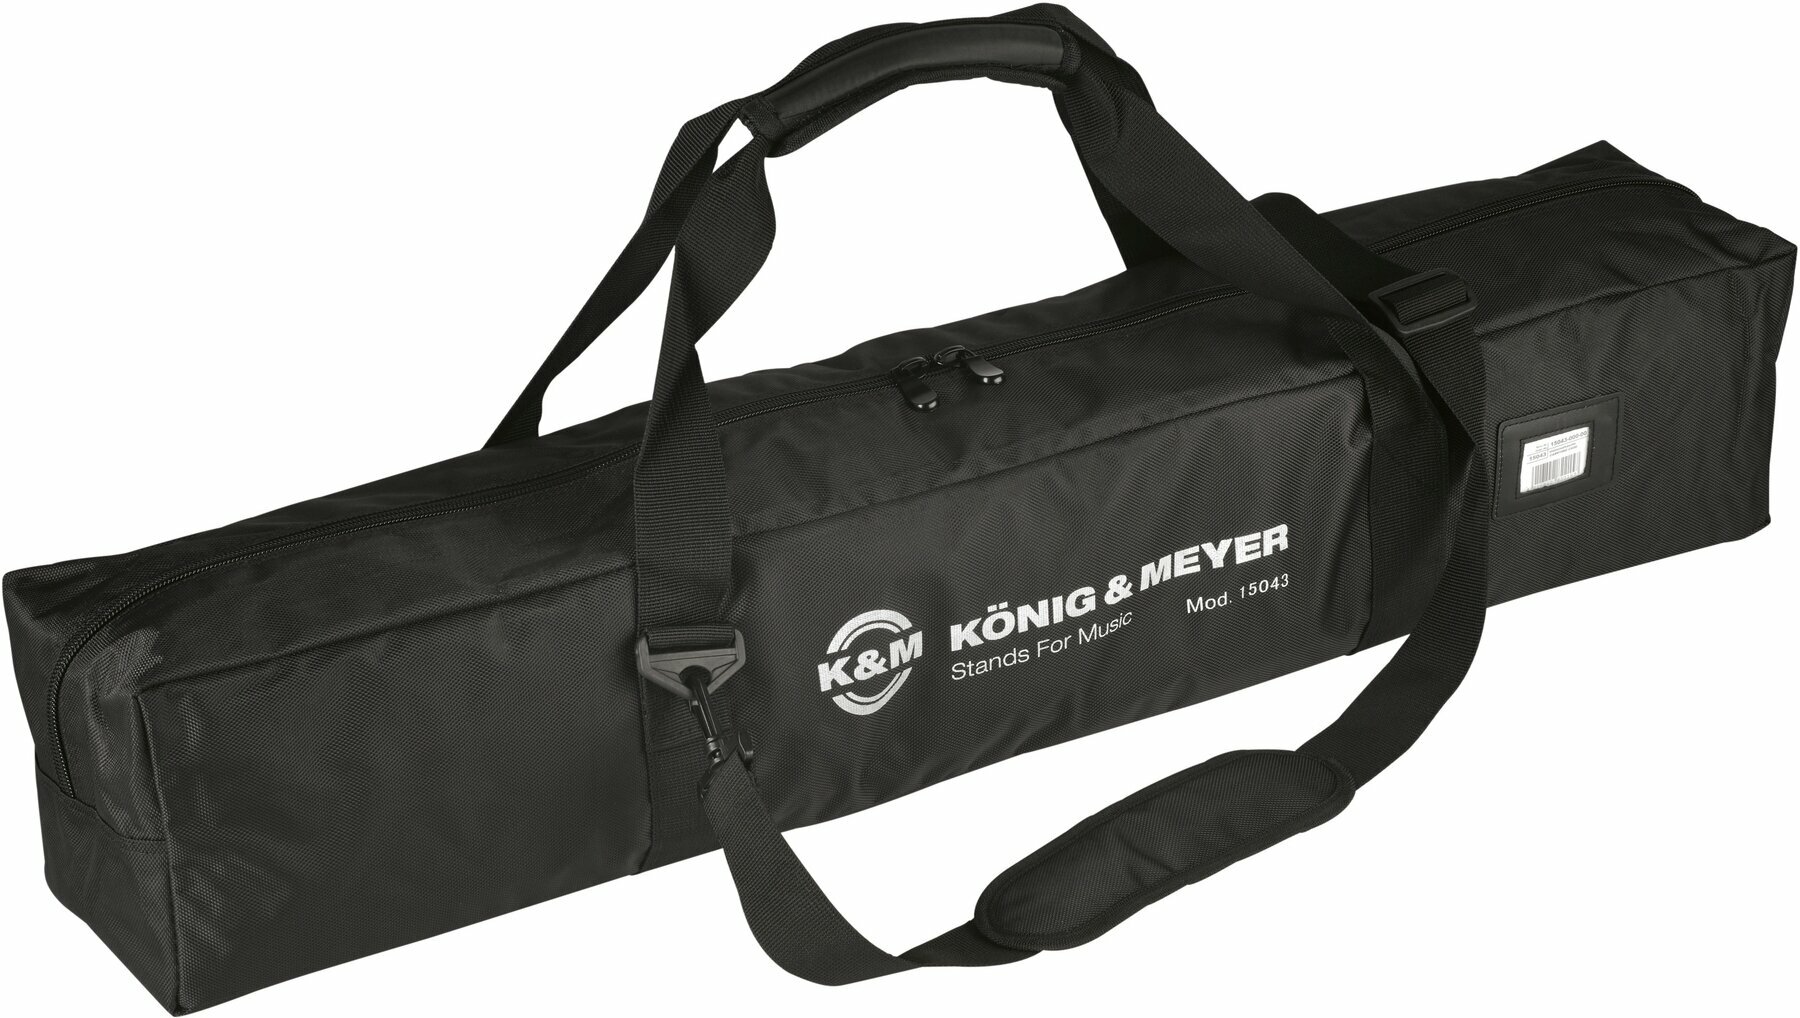 Protective Cover Konig & Meyer 15043 Protective Cover